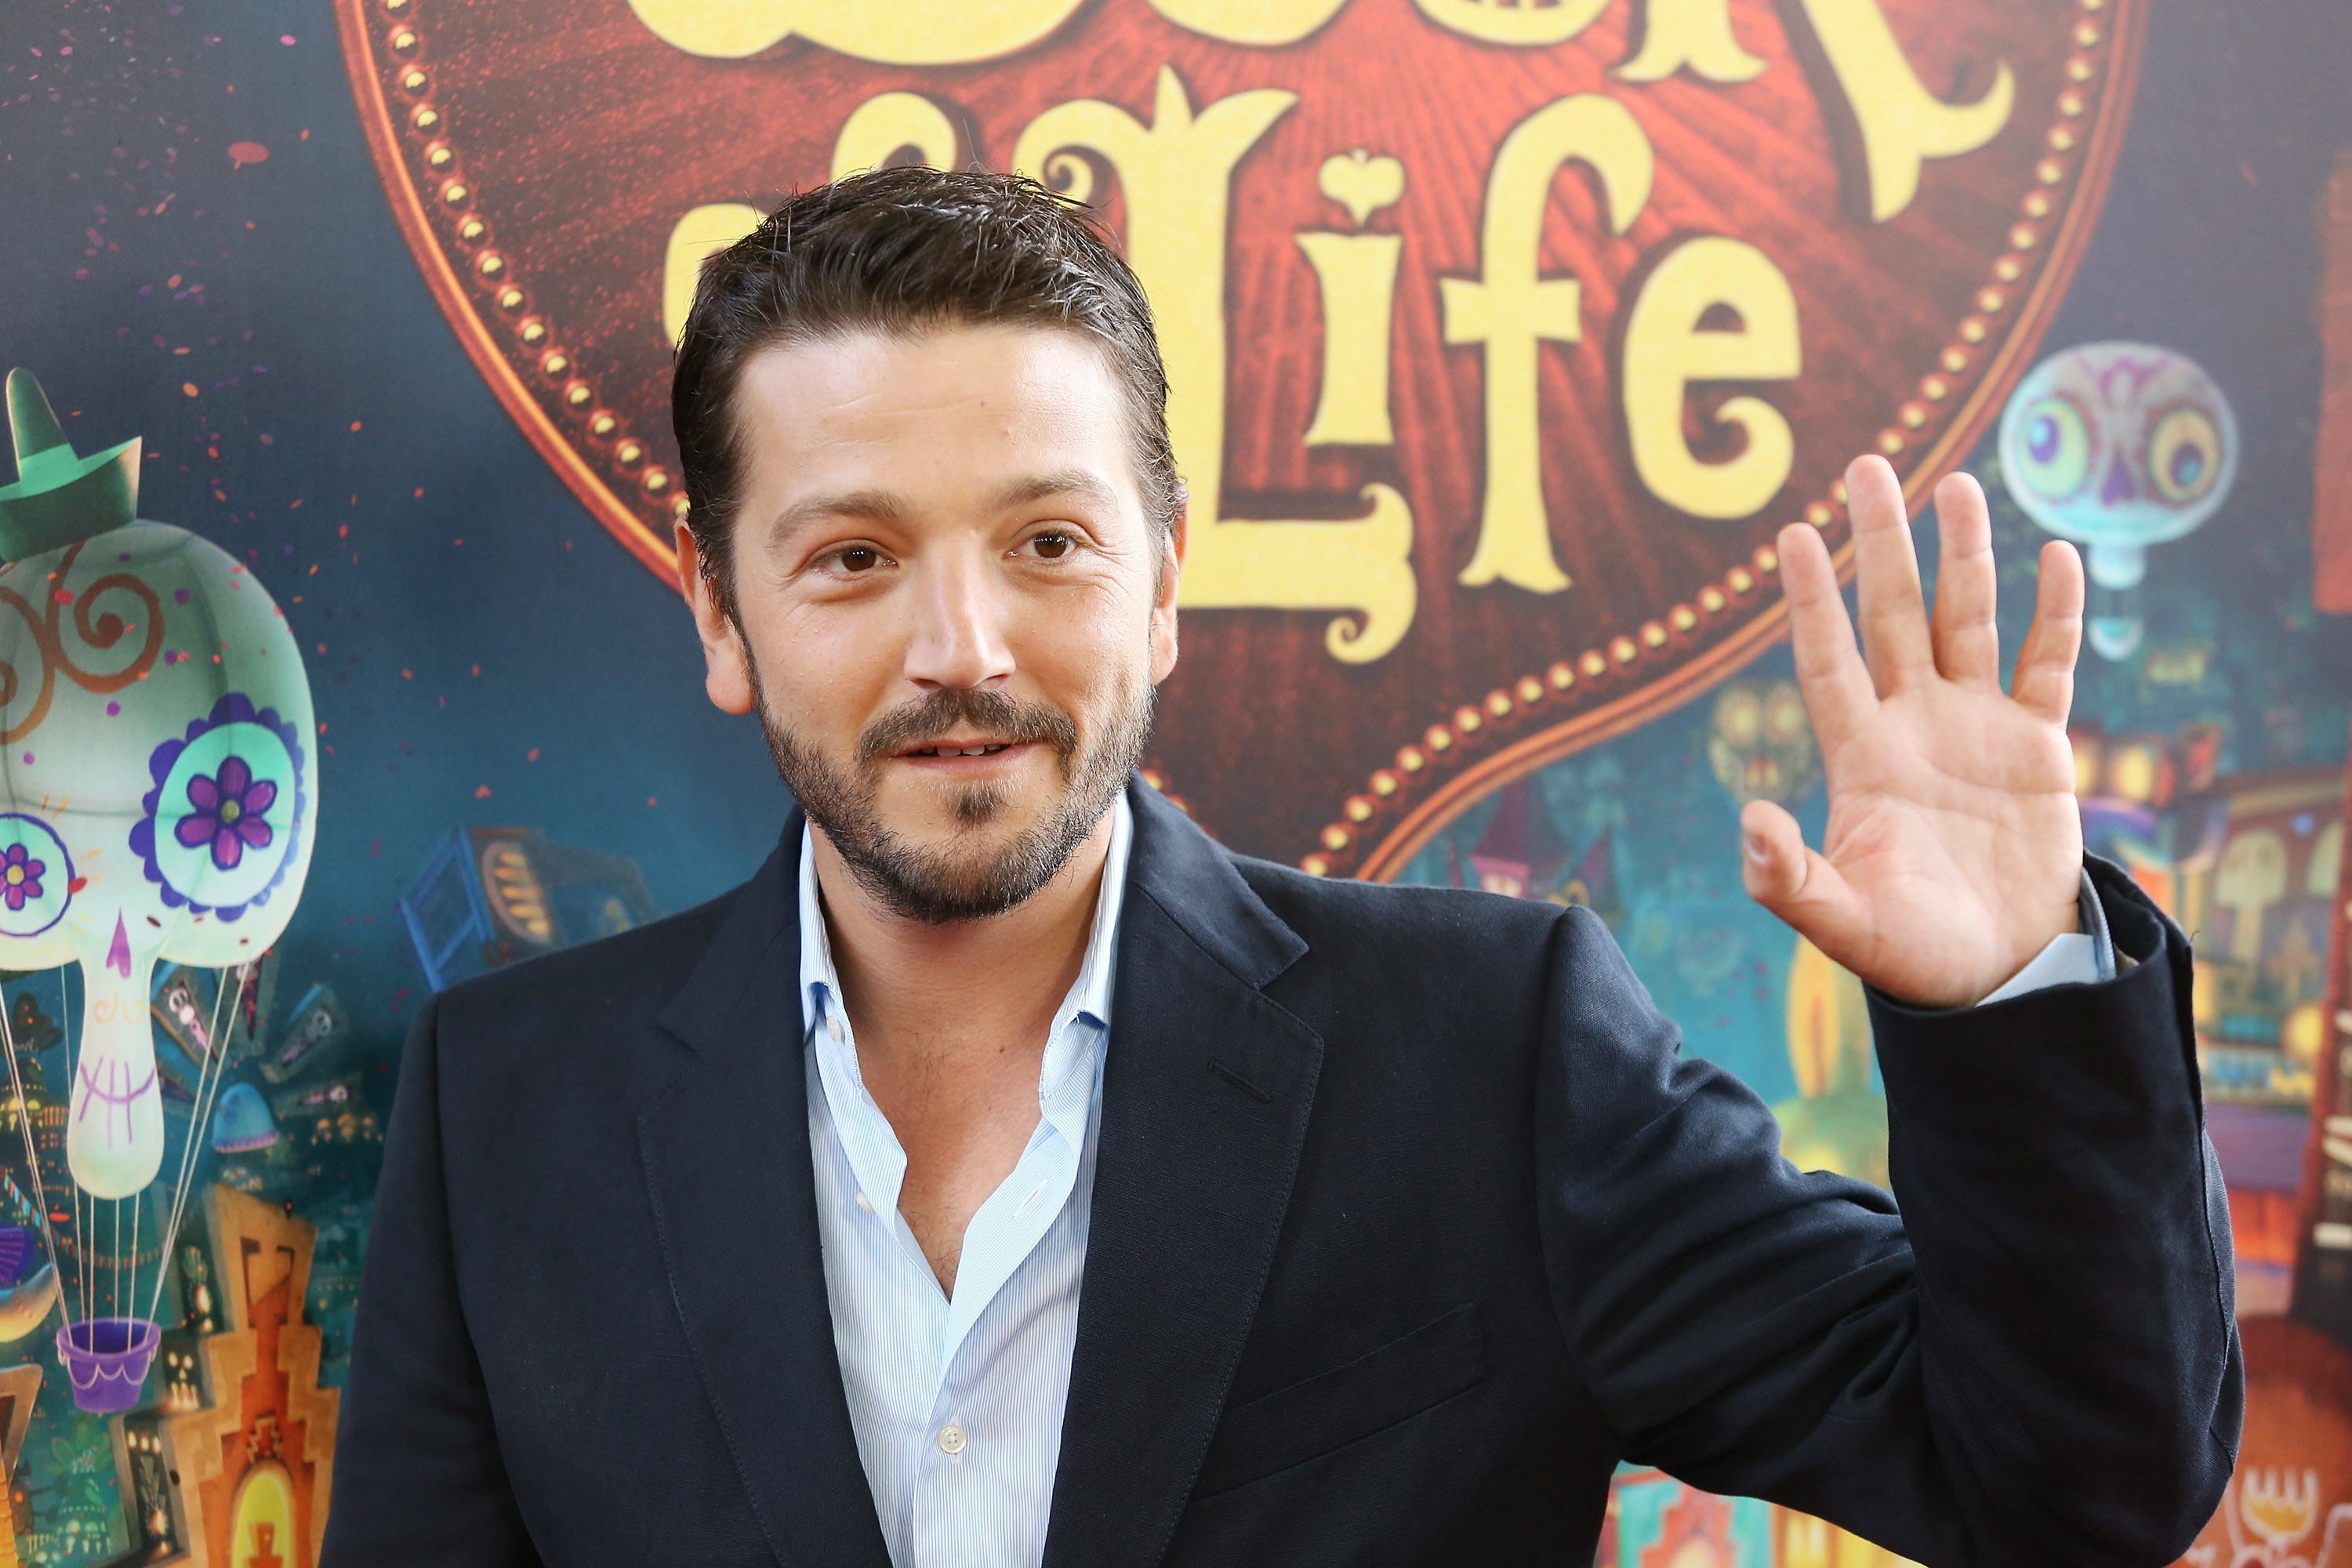 Diego Luna arrives at the Los Angeles premiere of "Book Of Life" held at Regal Cinemas L.A. Live on October 12, 2014 in Los Angeles, California. (Michael Tran&mdash;FilmMagic /  Getty Images)